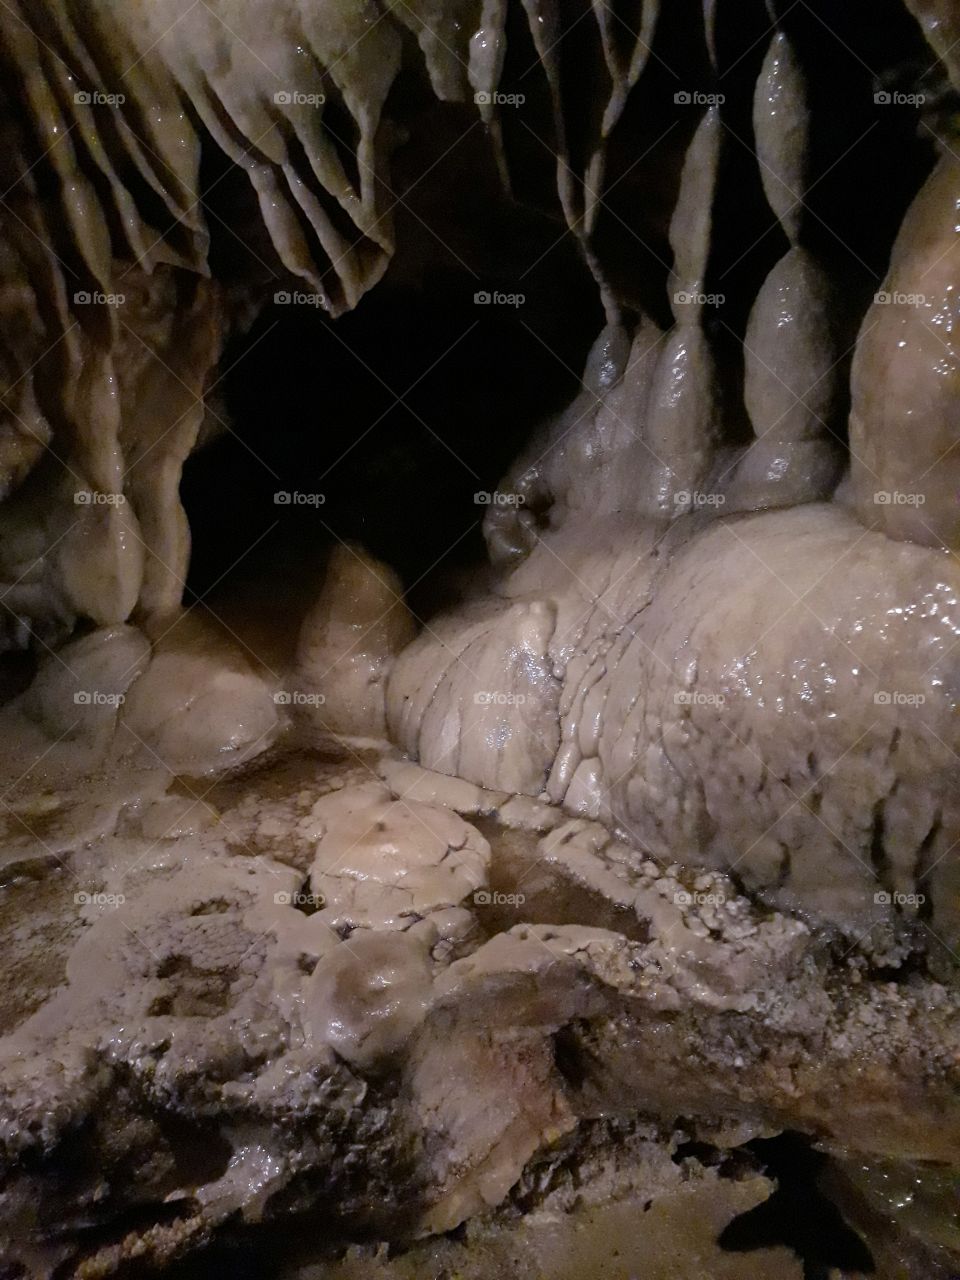 Inside a developing cave